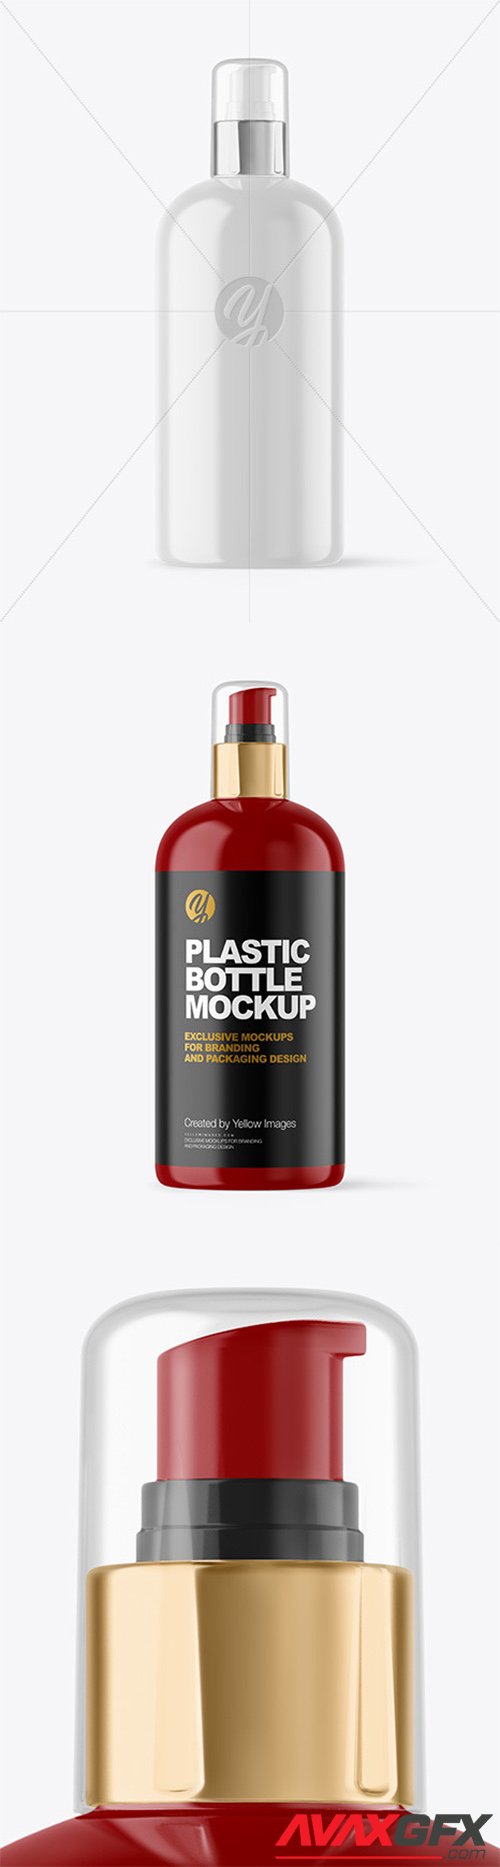 Glossy Cosmetic Bottle with Pump Mockup 65666